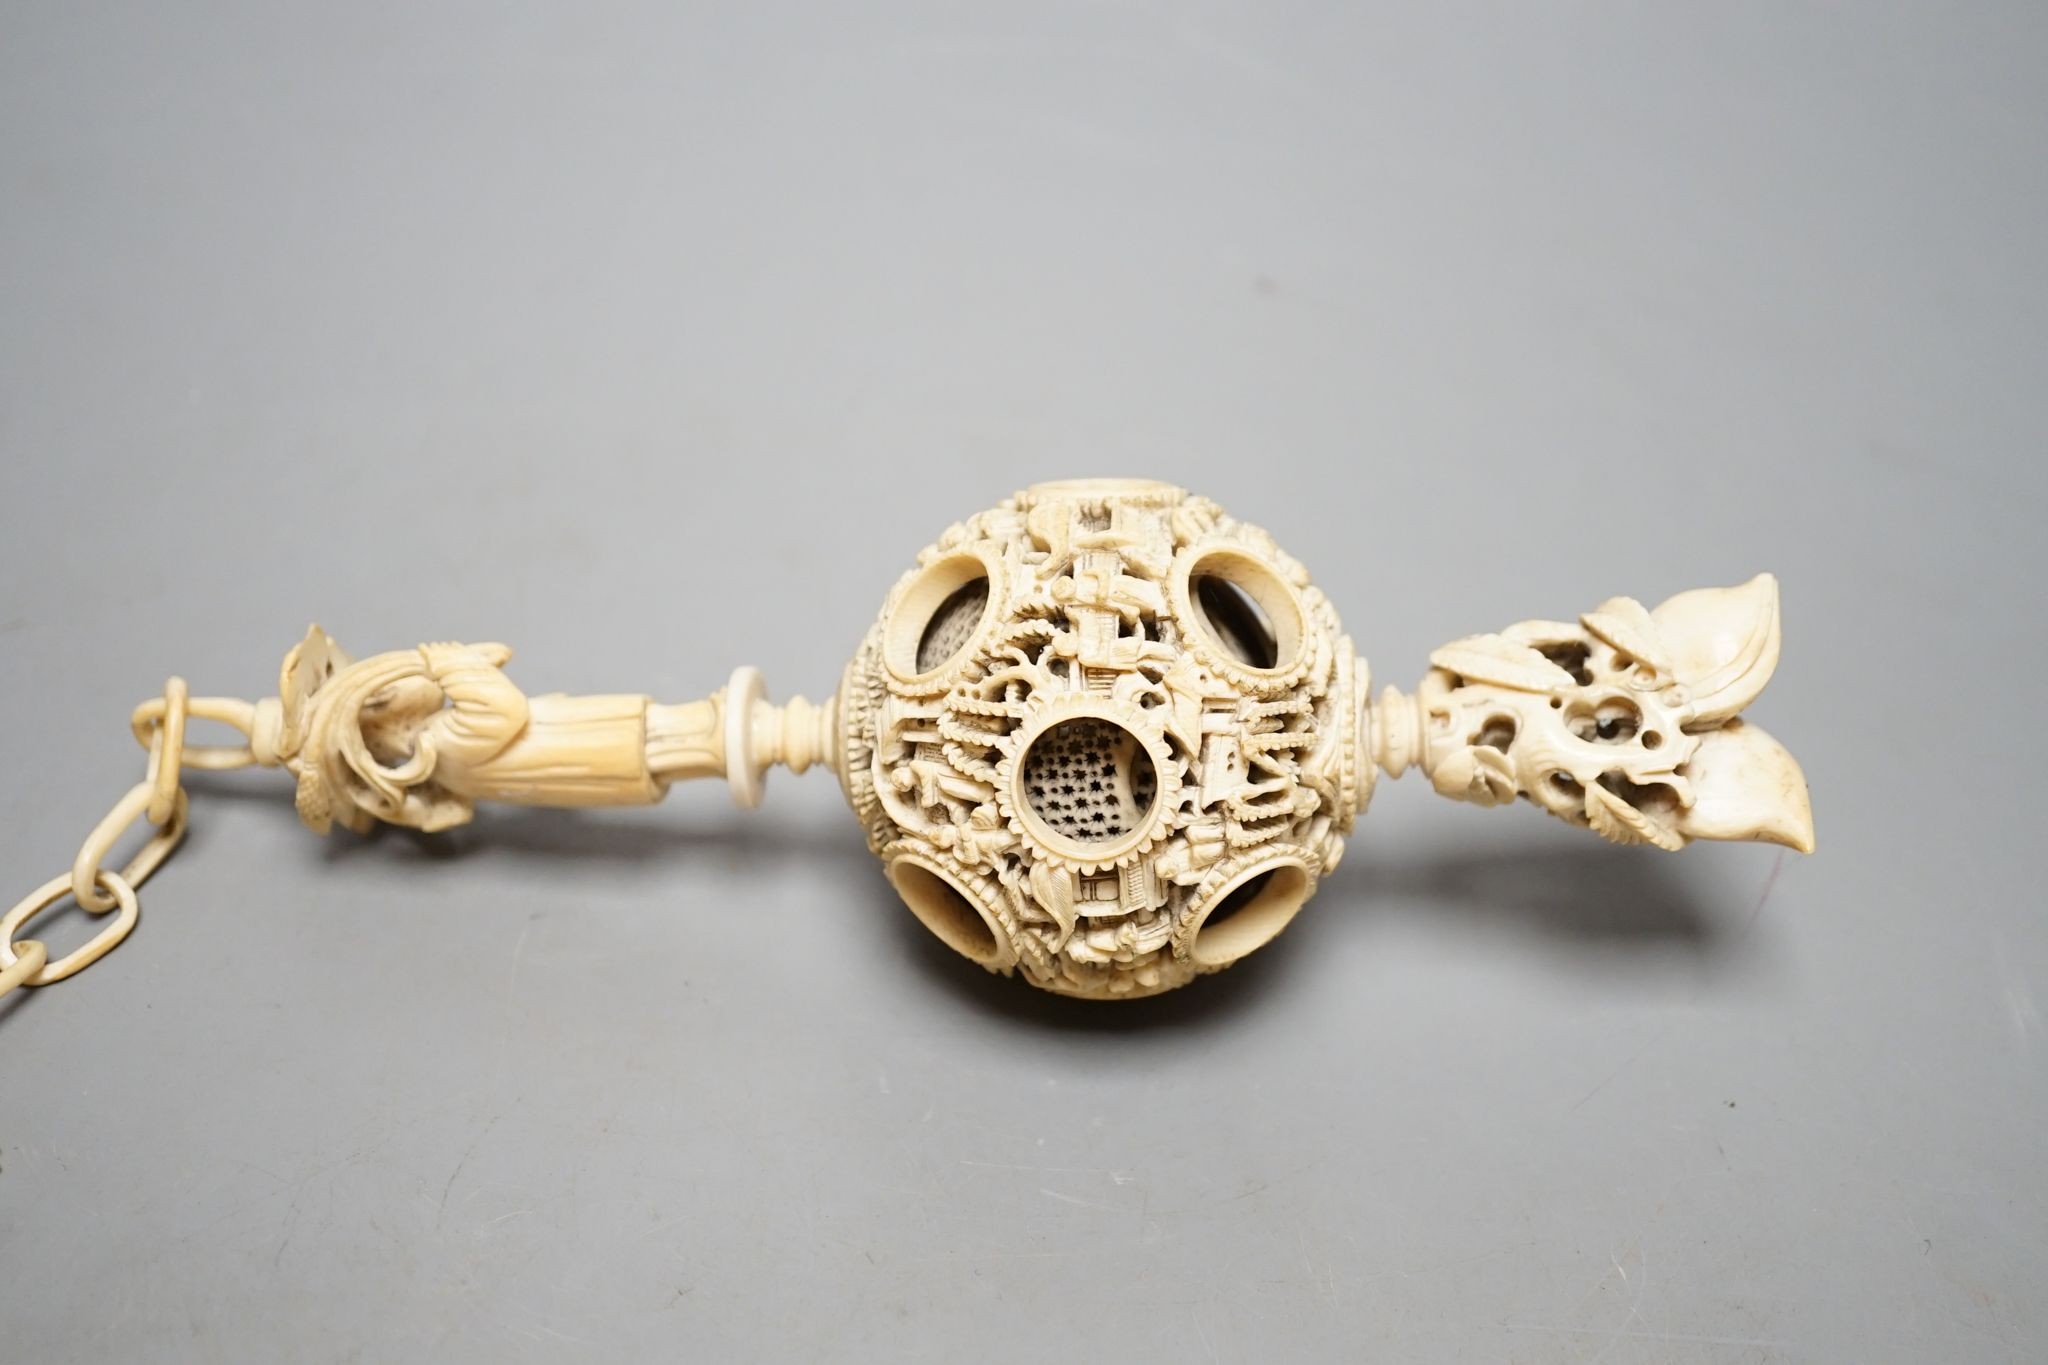 A 19th century Chinese export ivory puzzle ball., 31 cms long including chain.